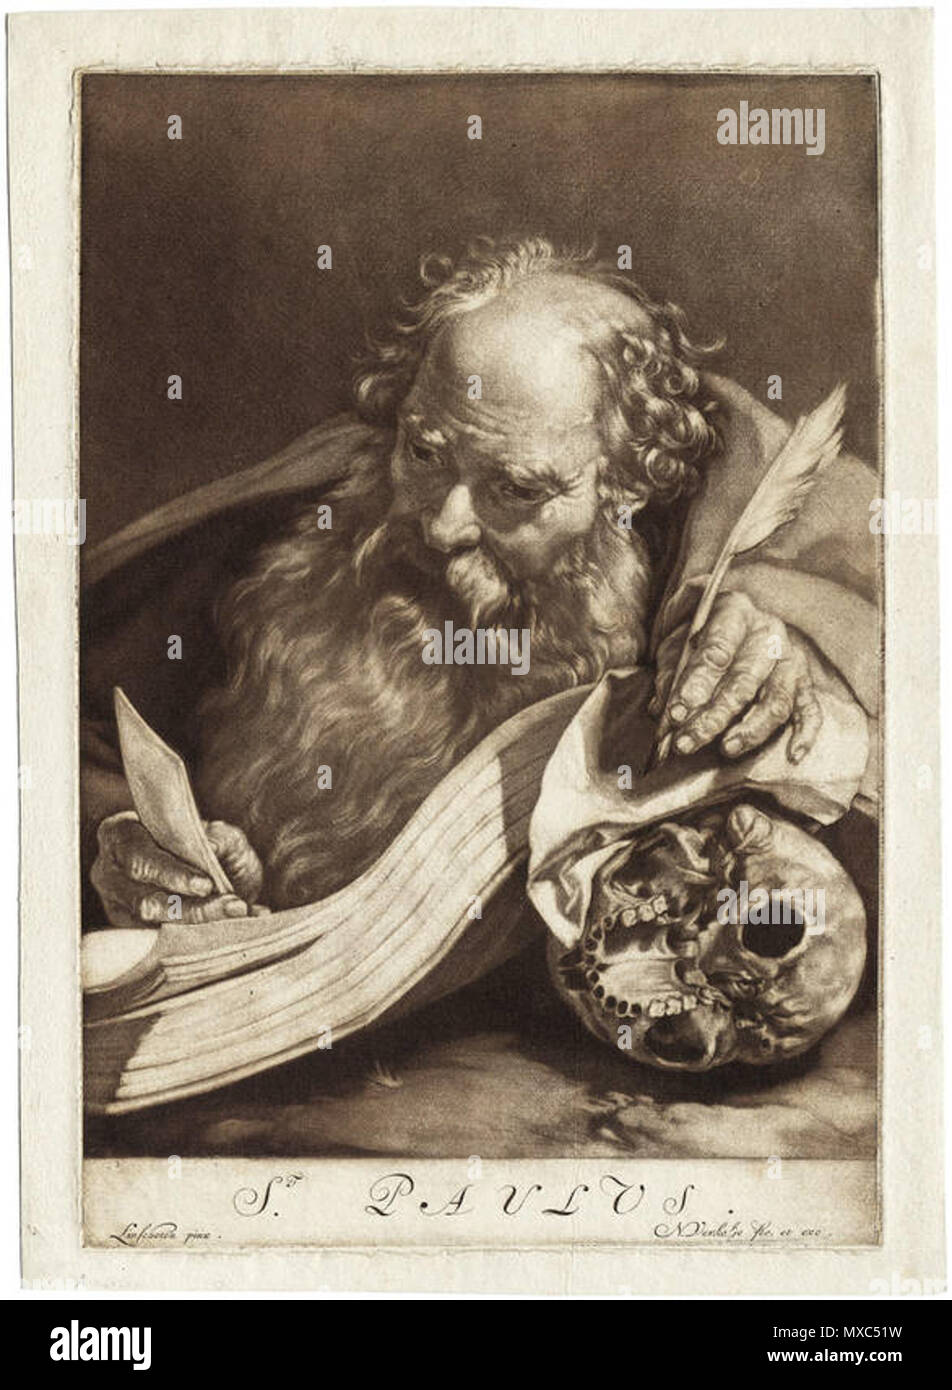 . English: The apostle paul reading by candlelight, with a large open book leaning on a skull, seen from below. Mezzotint . Linschoten pinx; Nicolaas Verkolje fec et exc 373 Linschoten pinx - N Verkolje fec et exc - apostle Paul Stock Photo